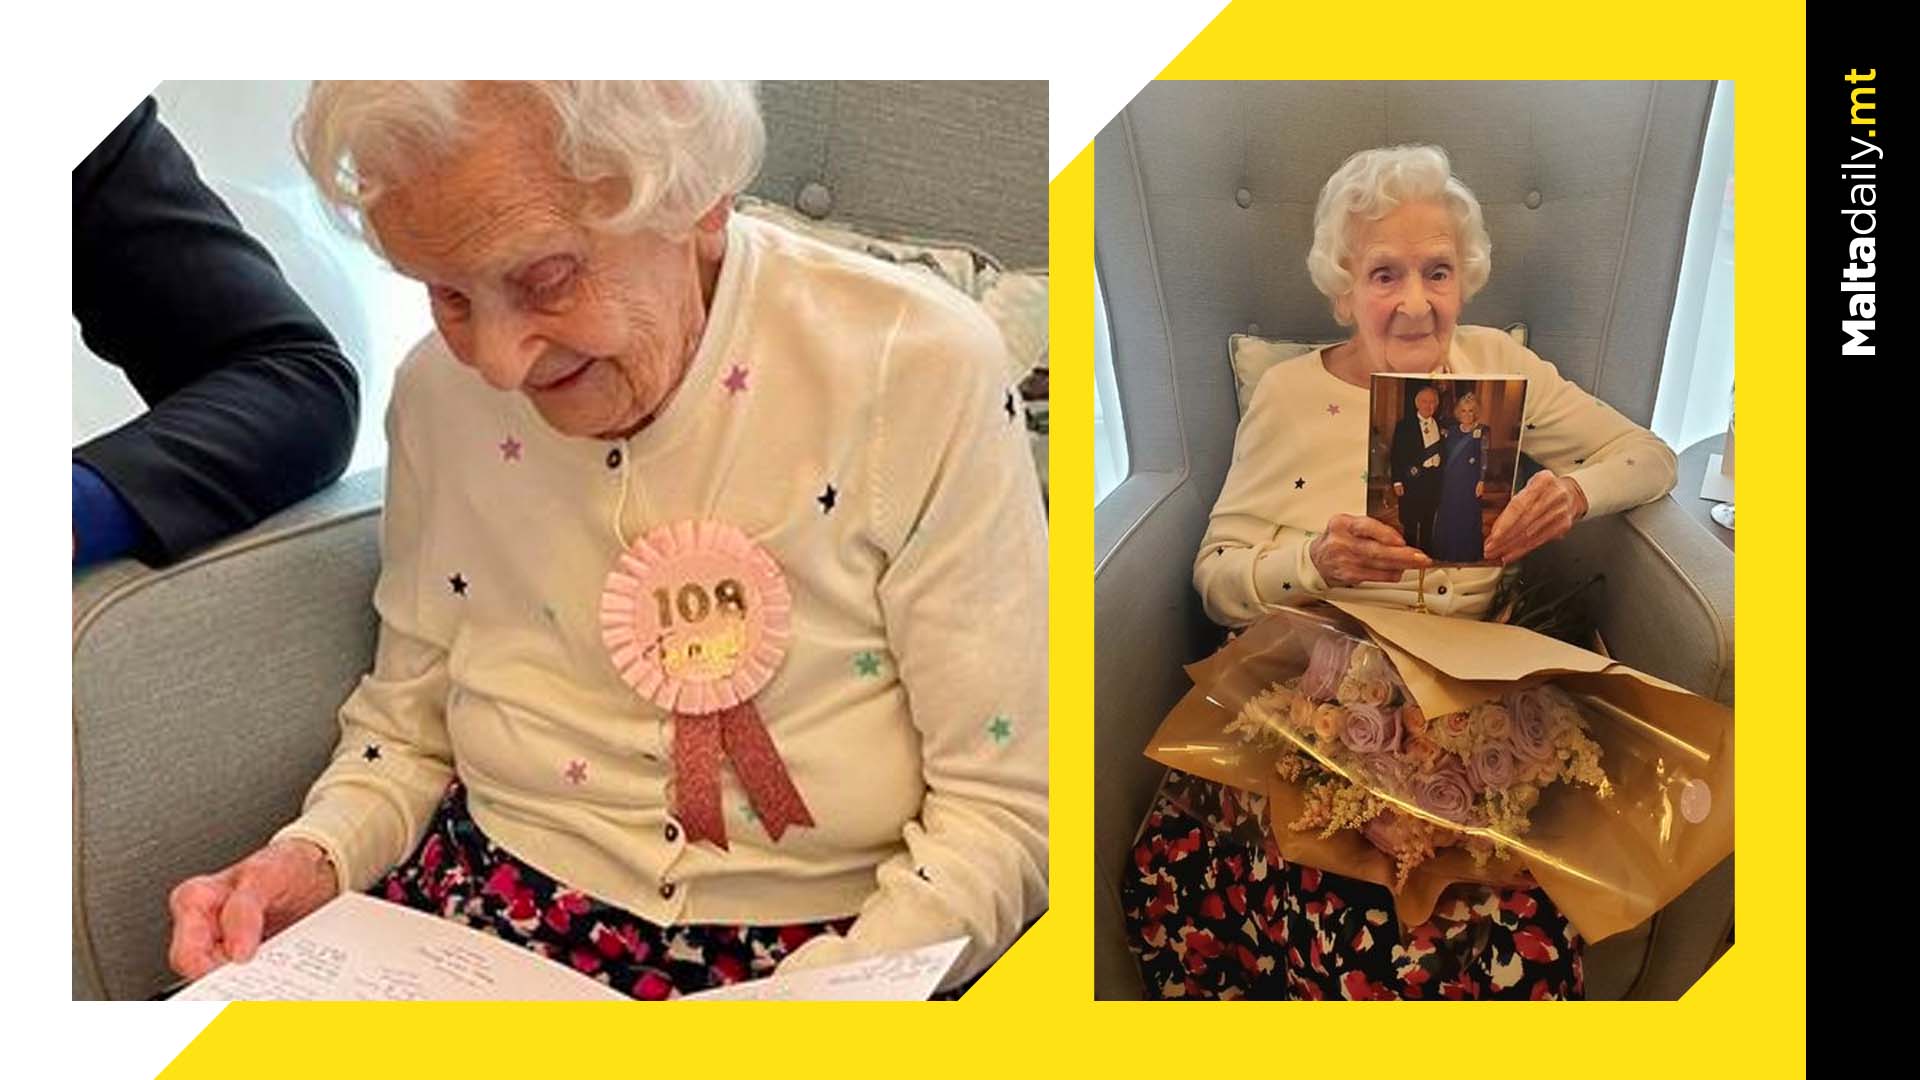 Work hard, party harder: a 108 year old's advice